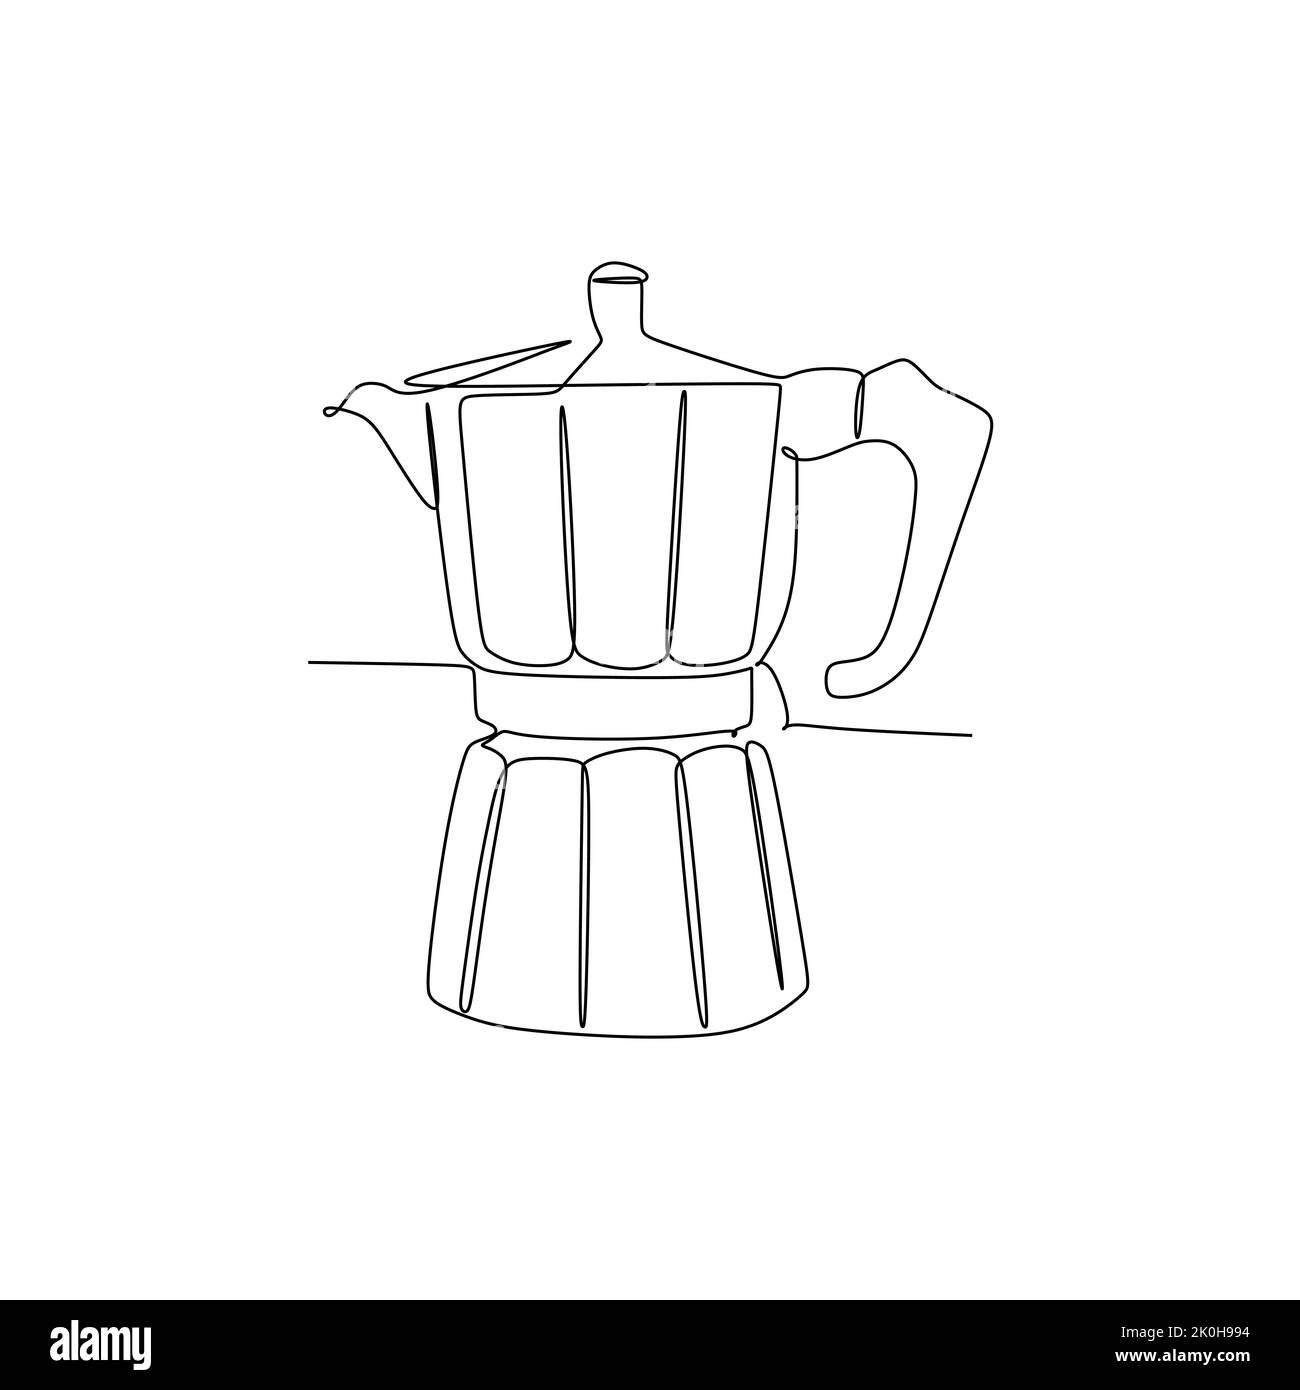 https://c8.alamy.com/comp/2K0H994/moka-pot-coffee-maker-continuous-one-line-drawing-vector-illustration-hand-drawn-style-design-for-food-and-beverages-concept-2K0H994.jpg